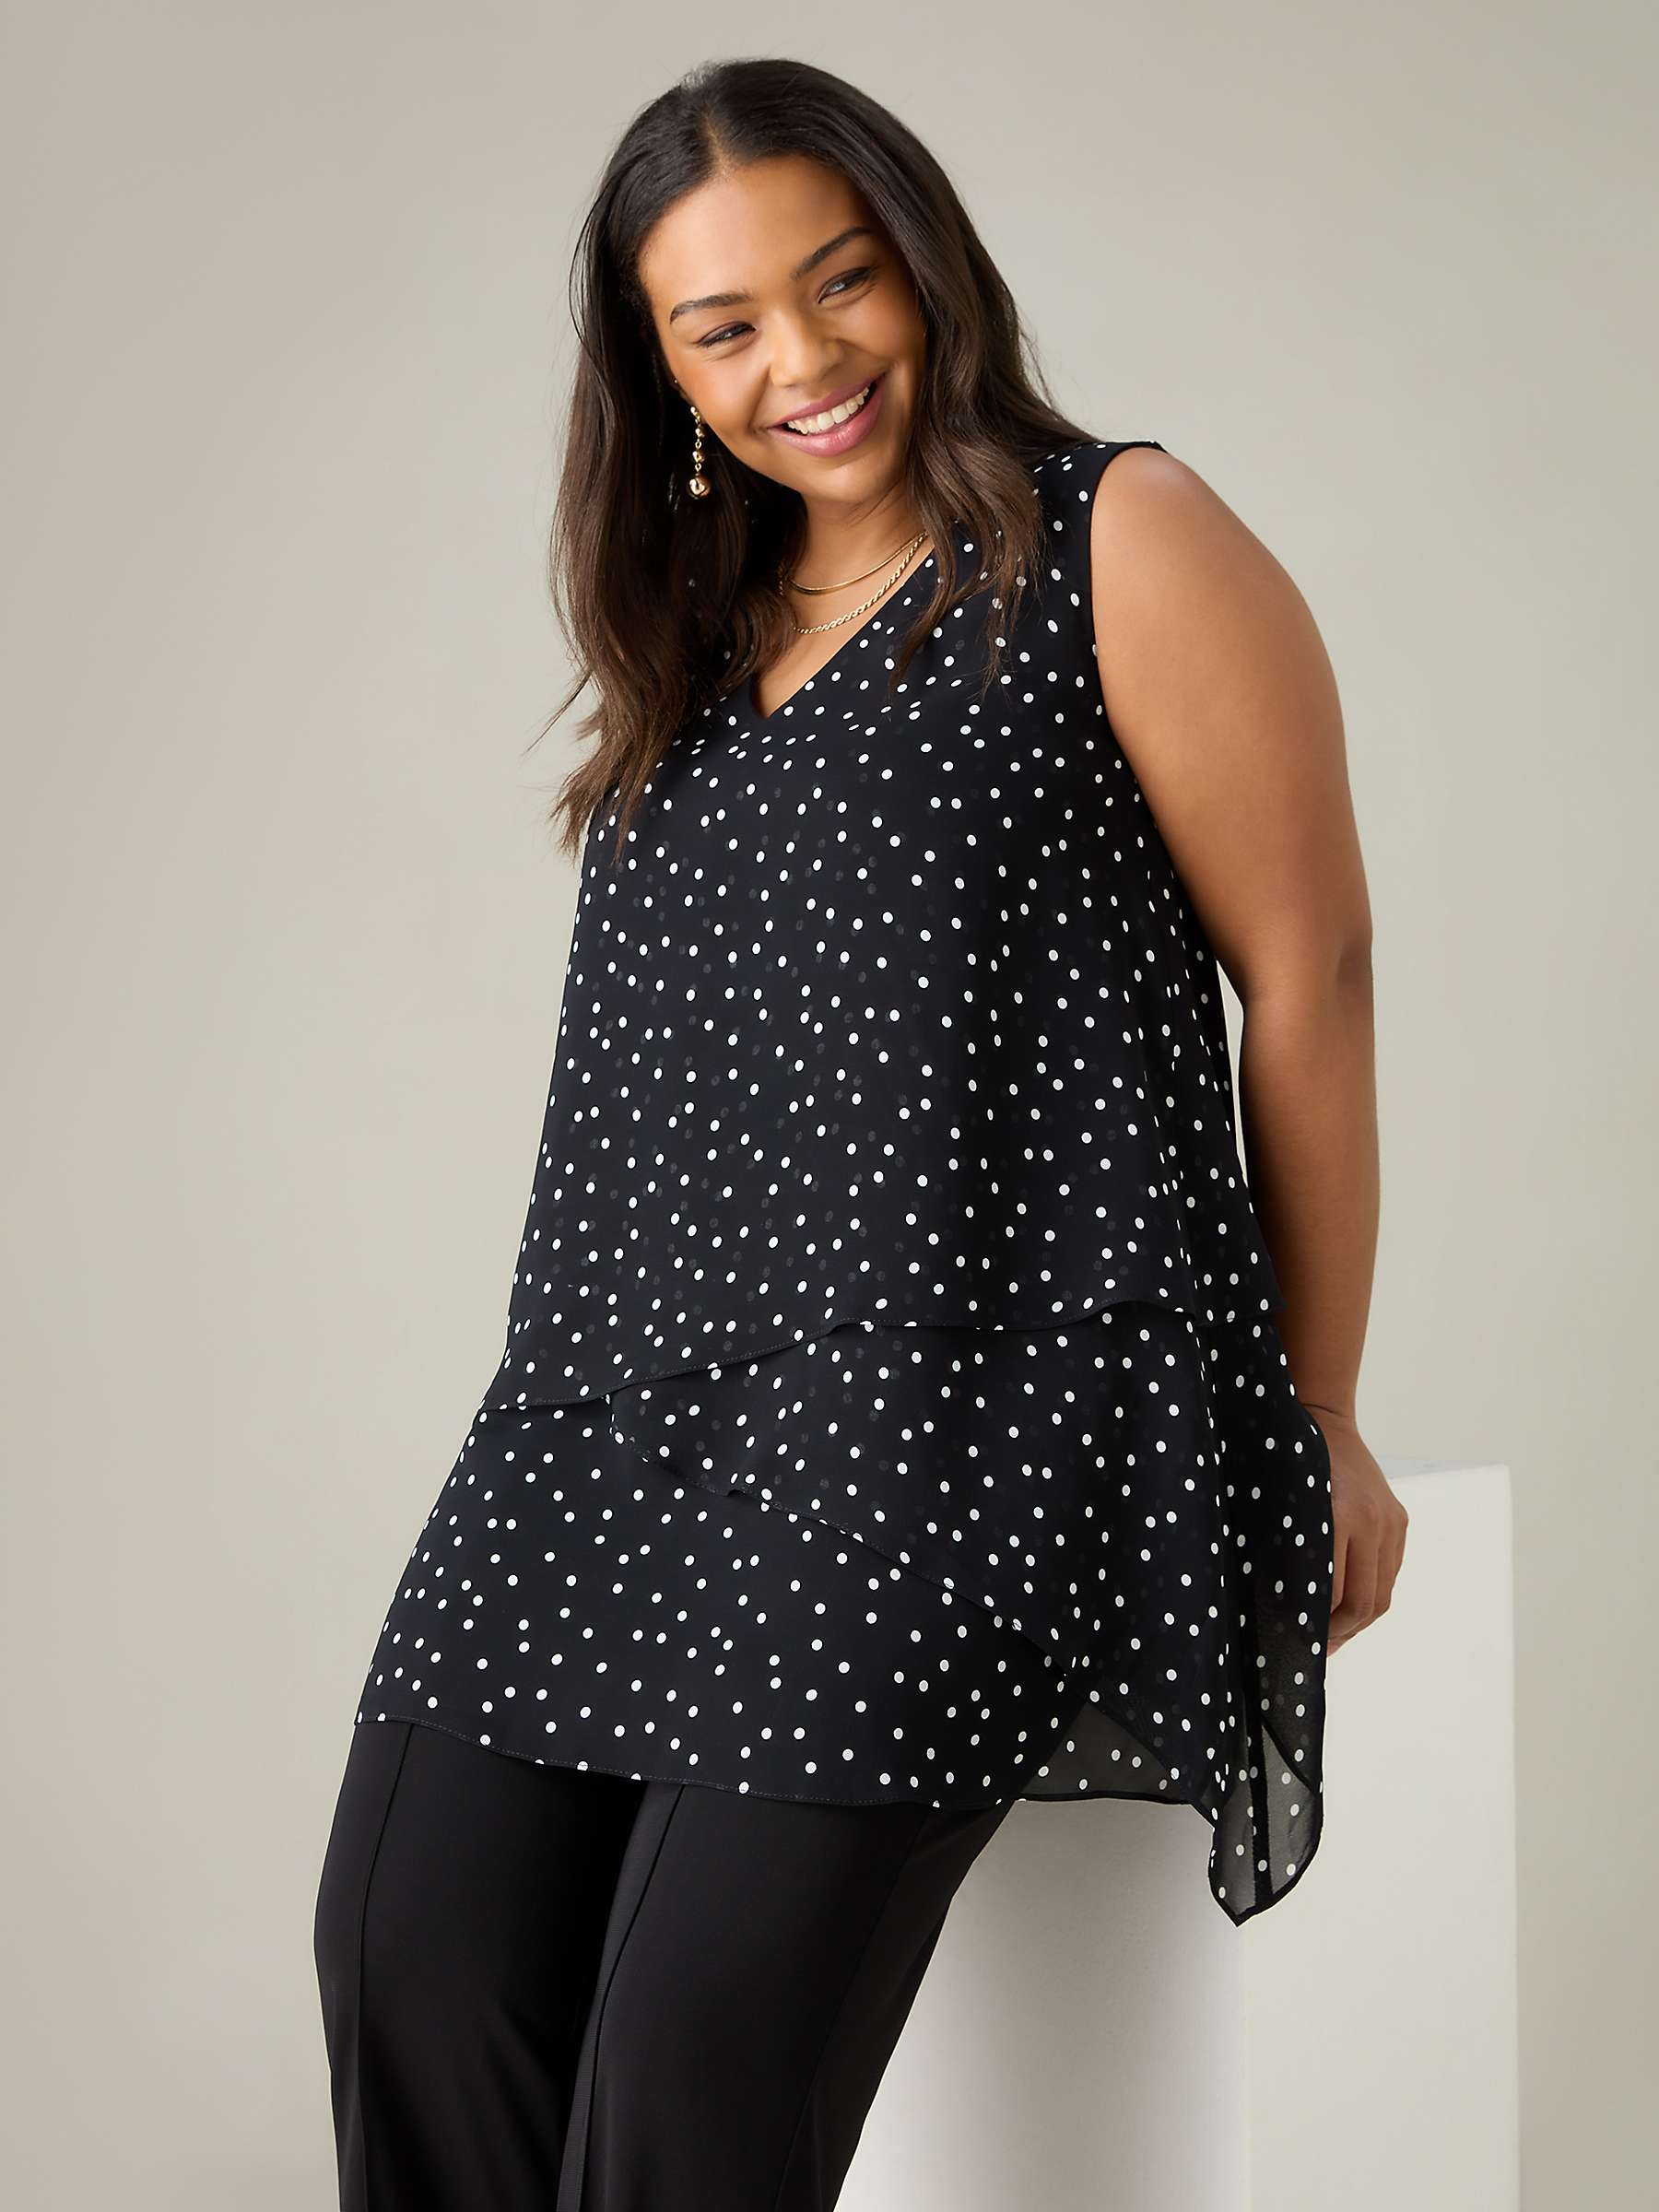 Buy Live Unlimited Petite Curve Mono Spot Print Layered Tunic Top, Black Online at johnlewis.com